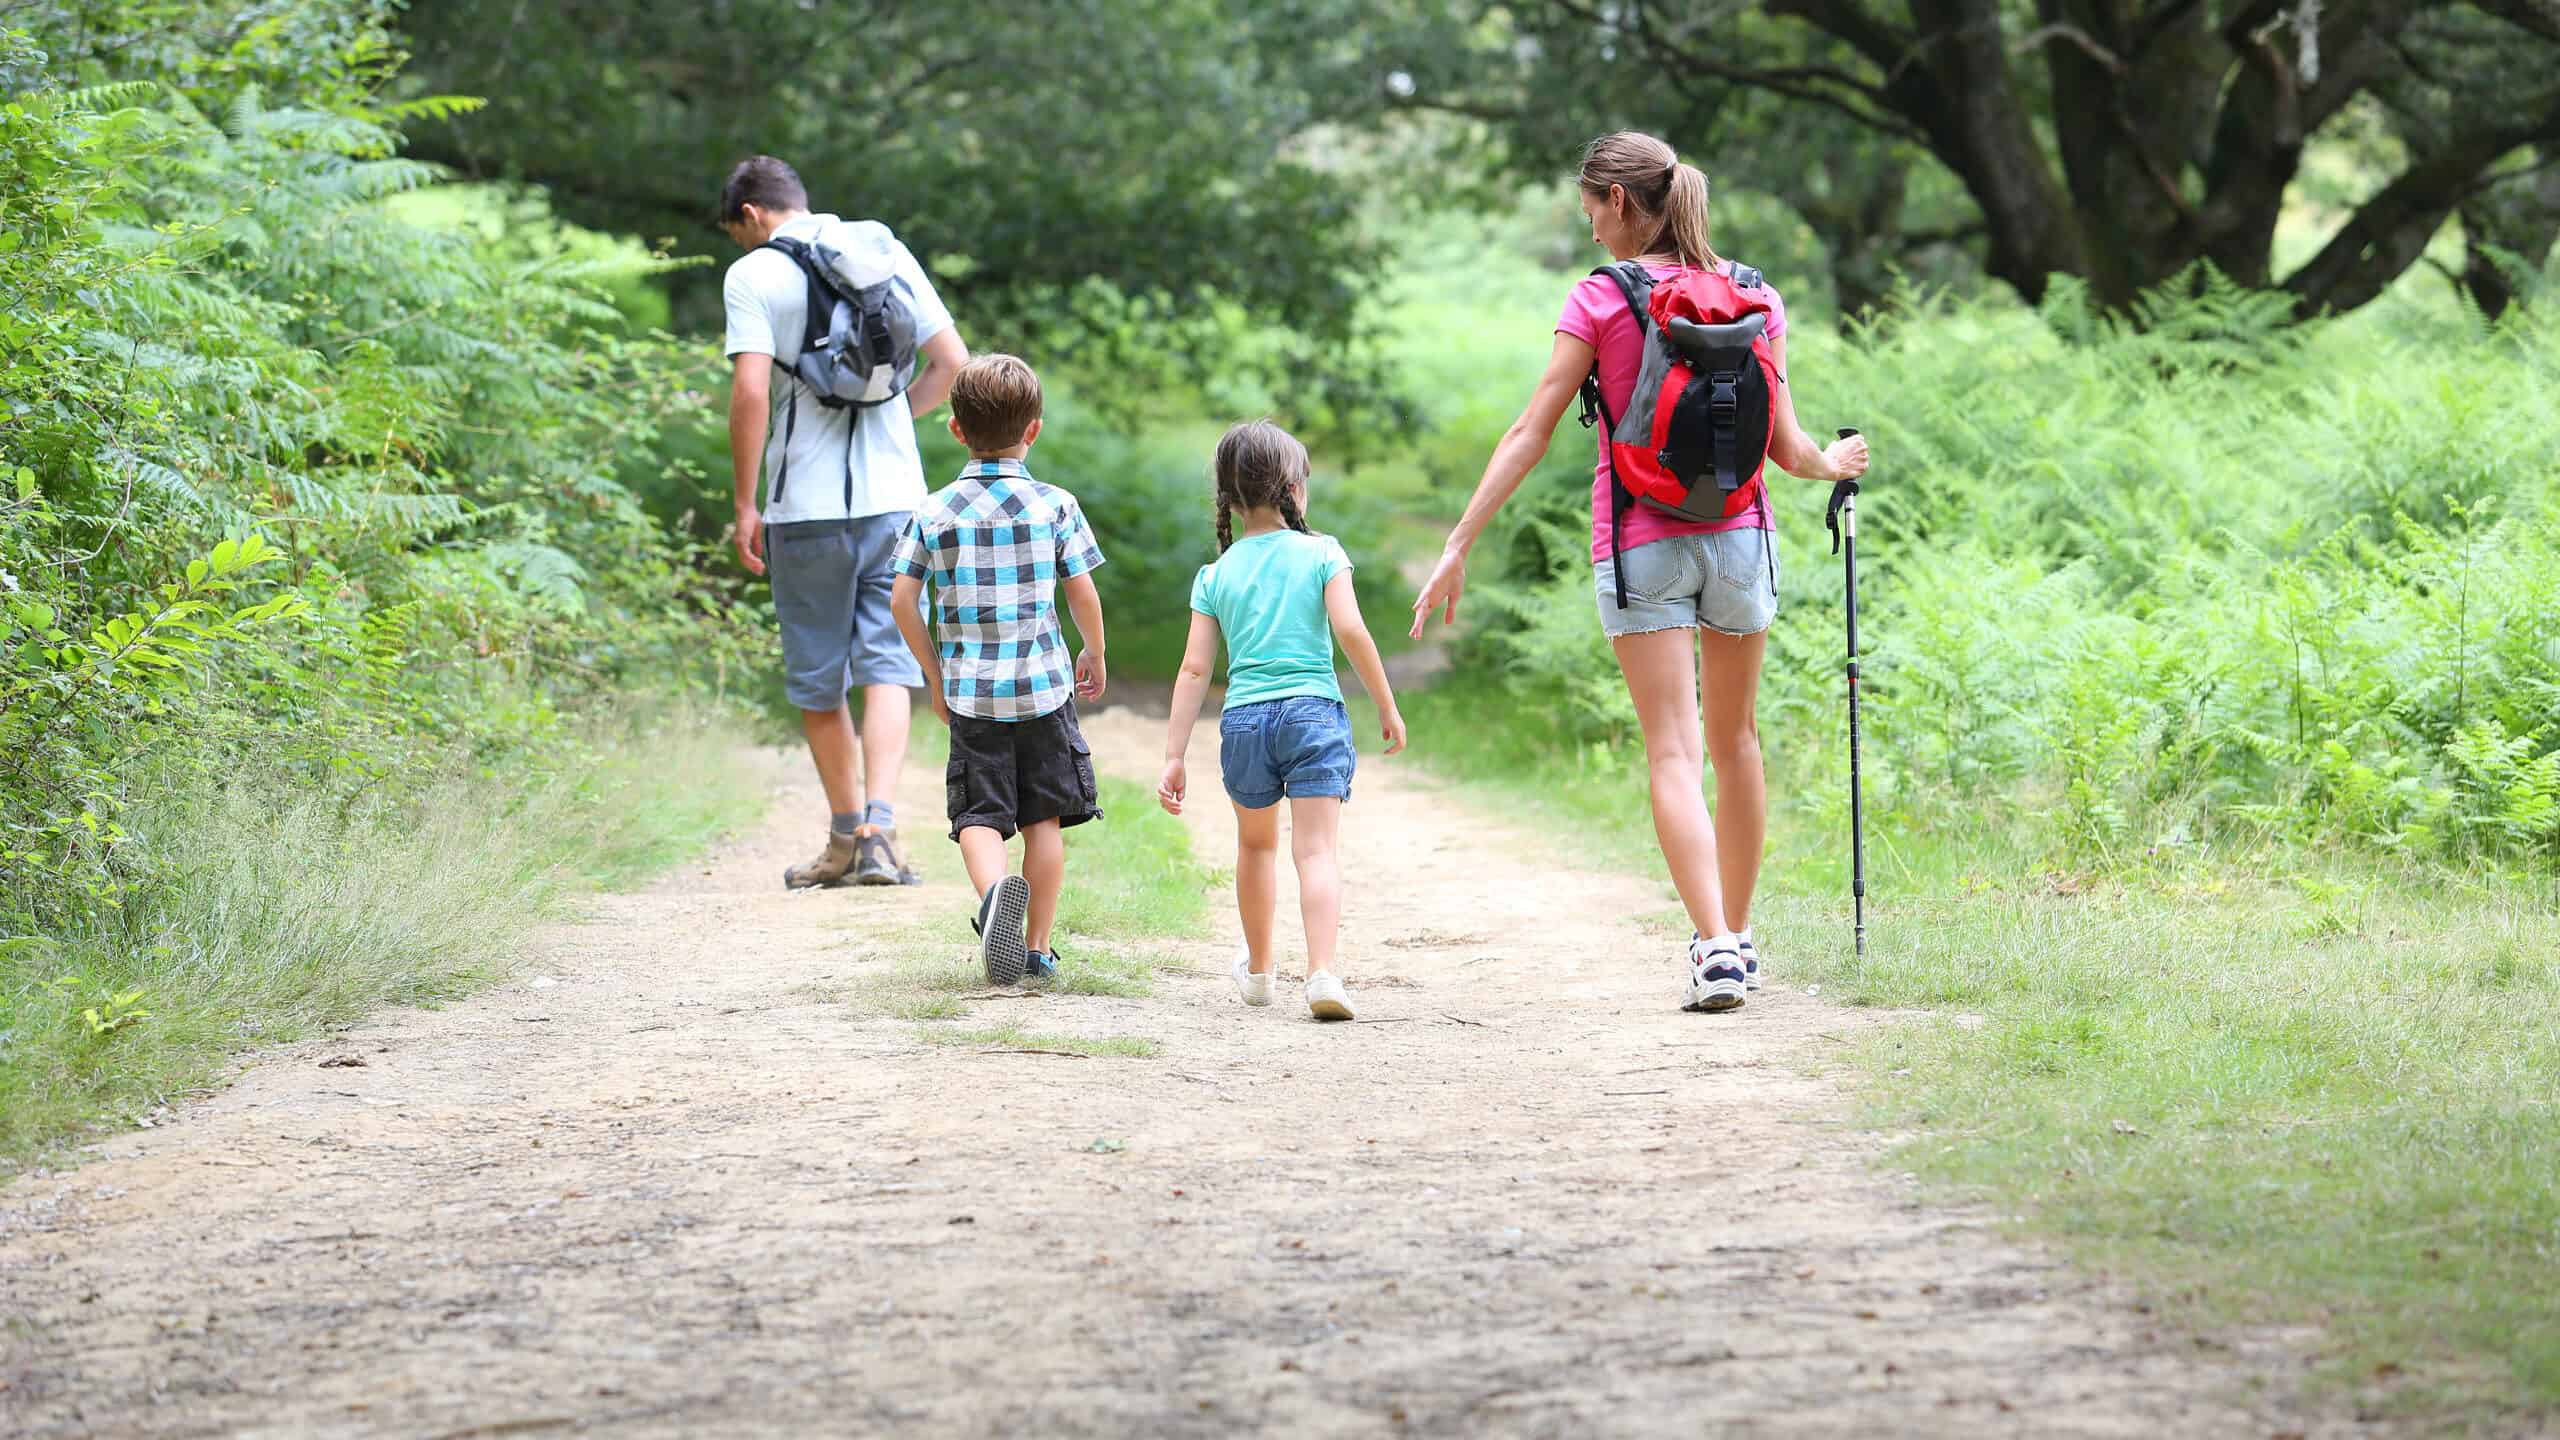 Photograph of a family on a hike. The family is facing away from the camera. Only their backs are visible.The family is light to olive skinned. They are walking on a dirt path. The path is surrounded by greenery. From left to right: a man wearing Knee length light blue shorts and a short sleeve white T-shirt has a knapsack on his back. He has short dark hair next but a little behind him is a little boy who is wearing black kneelength shorts and a black white and aqua plaid short sleeve shirt. Next to him is a little girl in short denim shorts and a jade green short sleeve T-shirt. She has long dark hair that is in braids. Next to her is a tall is woman who is wearing short faded blue denim shorts and a red short sleeve T-shirt. She also has a knapsack on her back. And is holding a aluminum walking pole in her right hand.